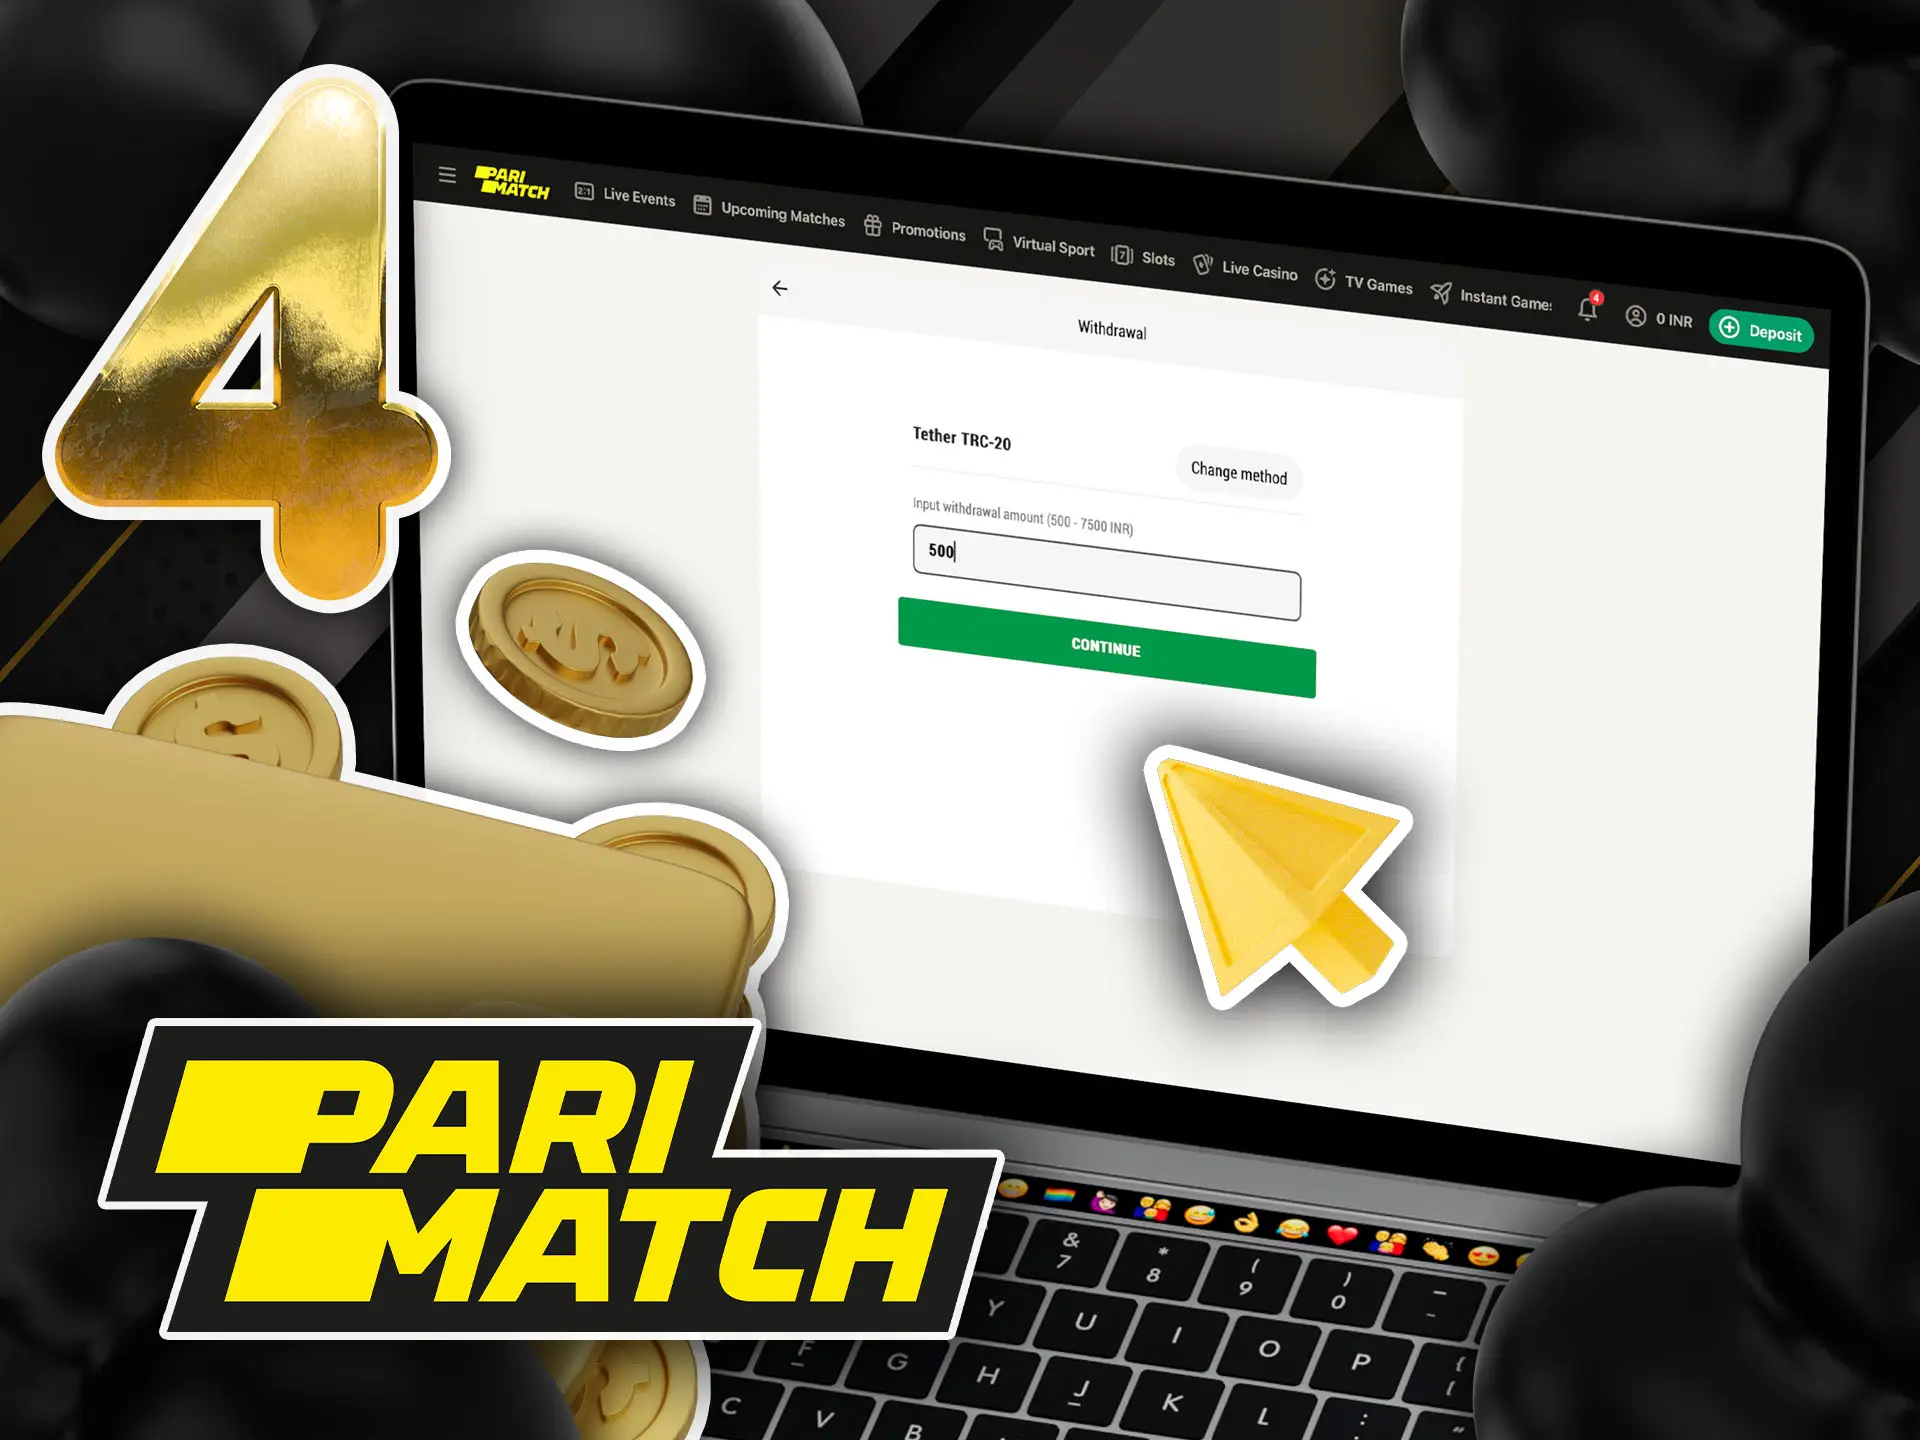 Complete the process of withdrawing your Parimatch winnings in India.